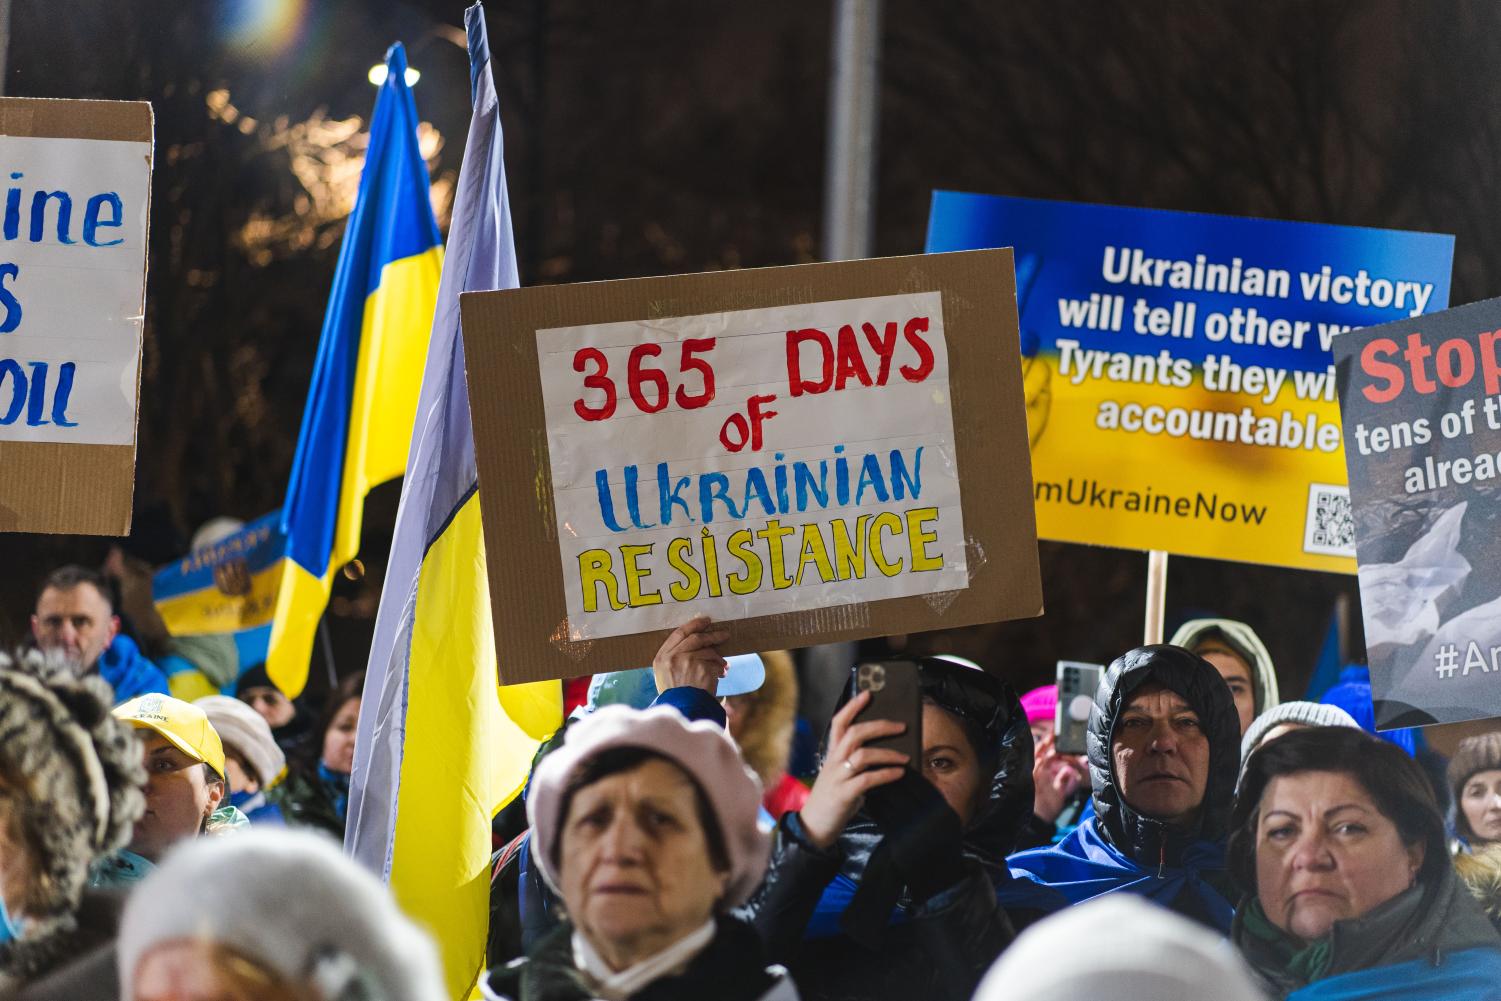 Protesters+are+holding+posters.+The+central+sign+says%3A+%E2%80%9C365+days+of+Ukrainian+Resistance%2C%E2%80%9D+written+with+blue+and+yellow+colors+of+the+Ukrainian+flag.